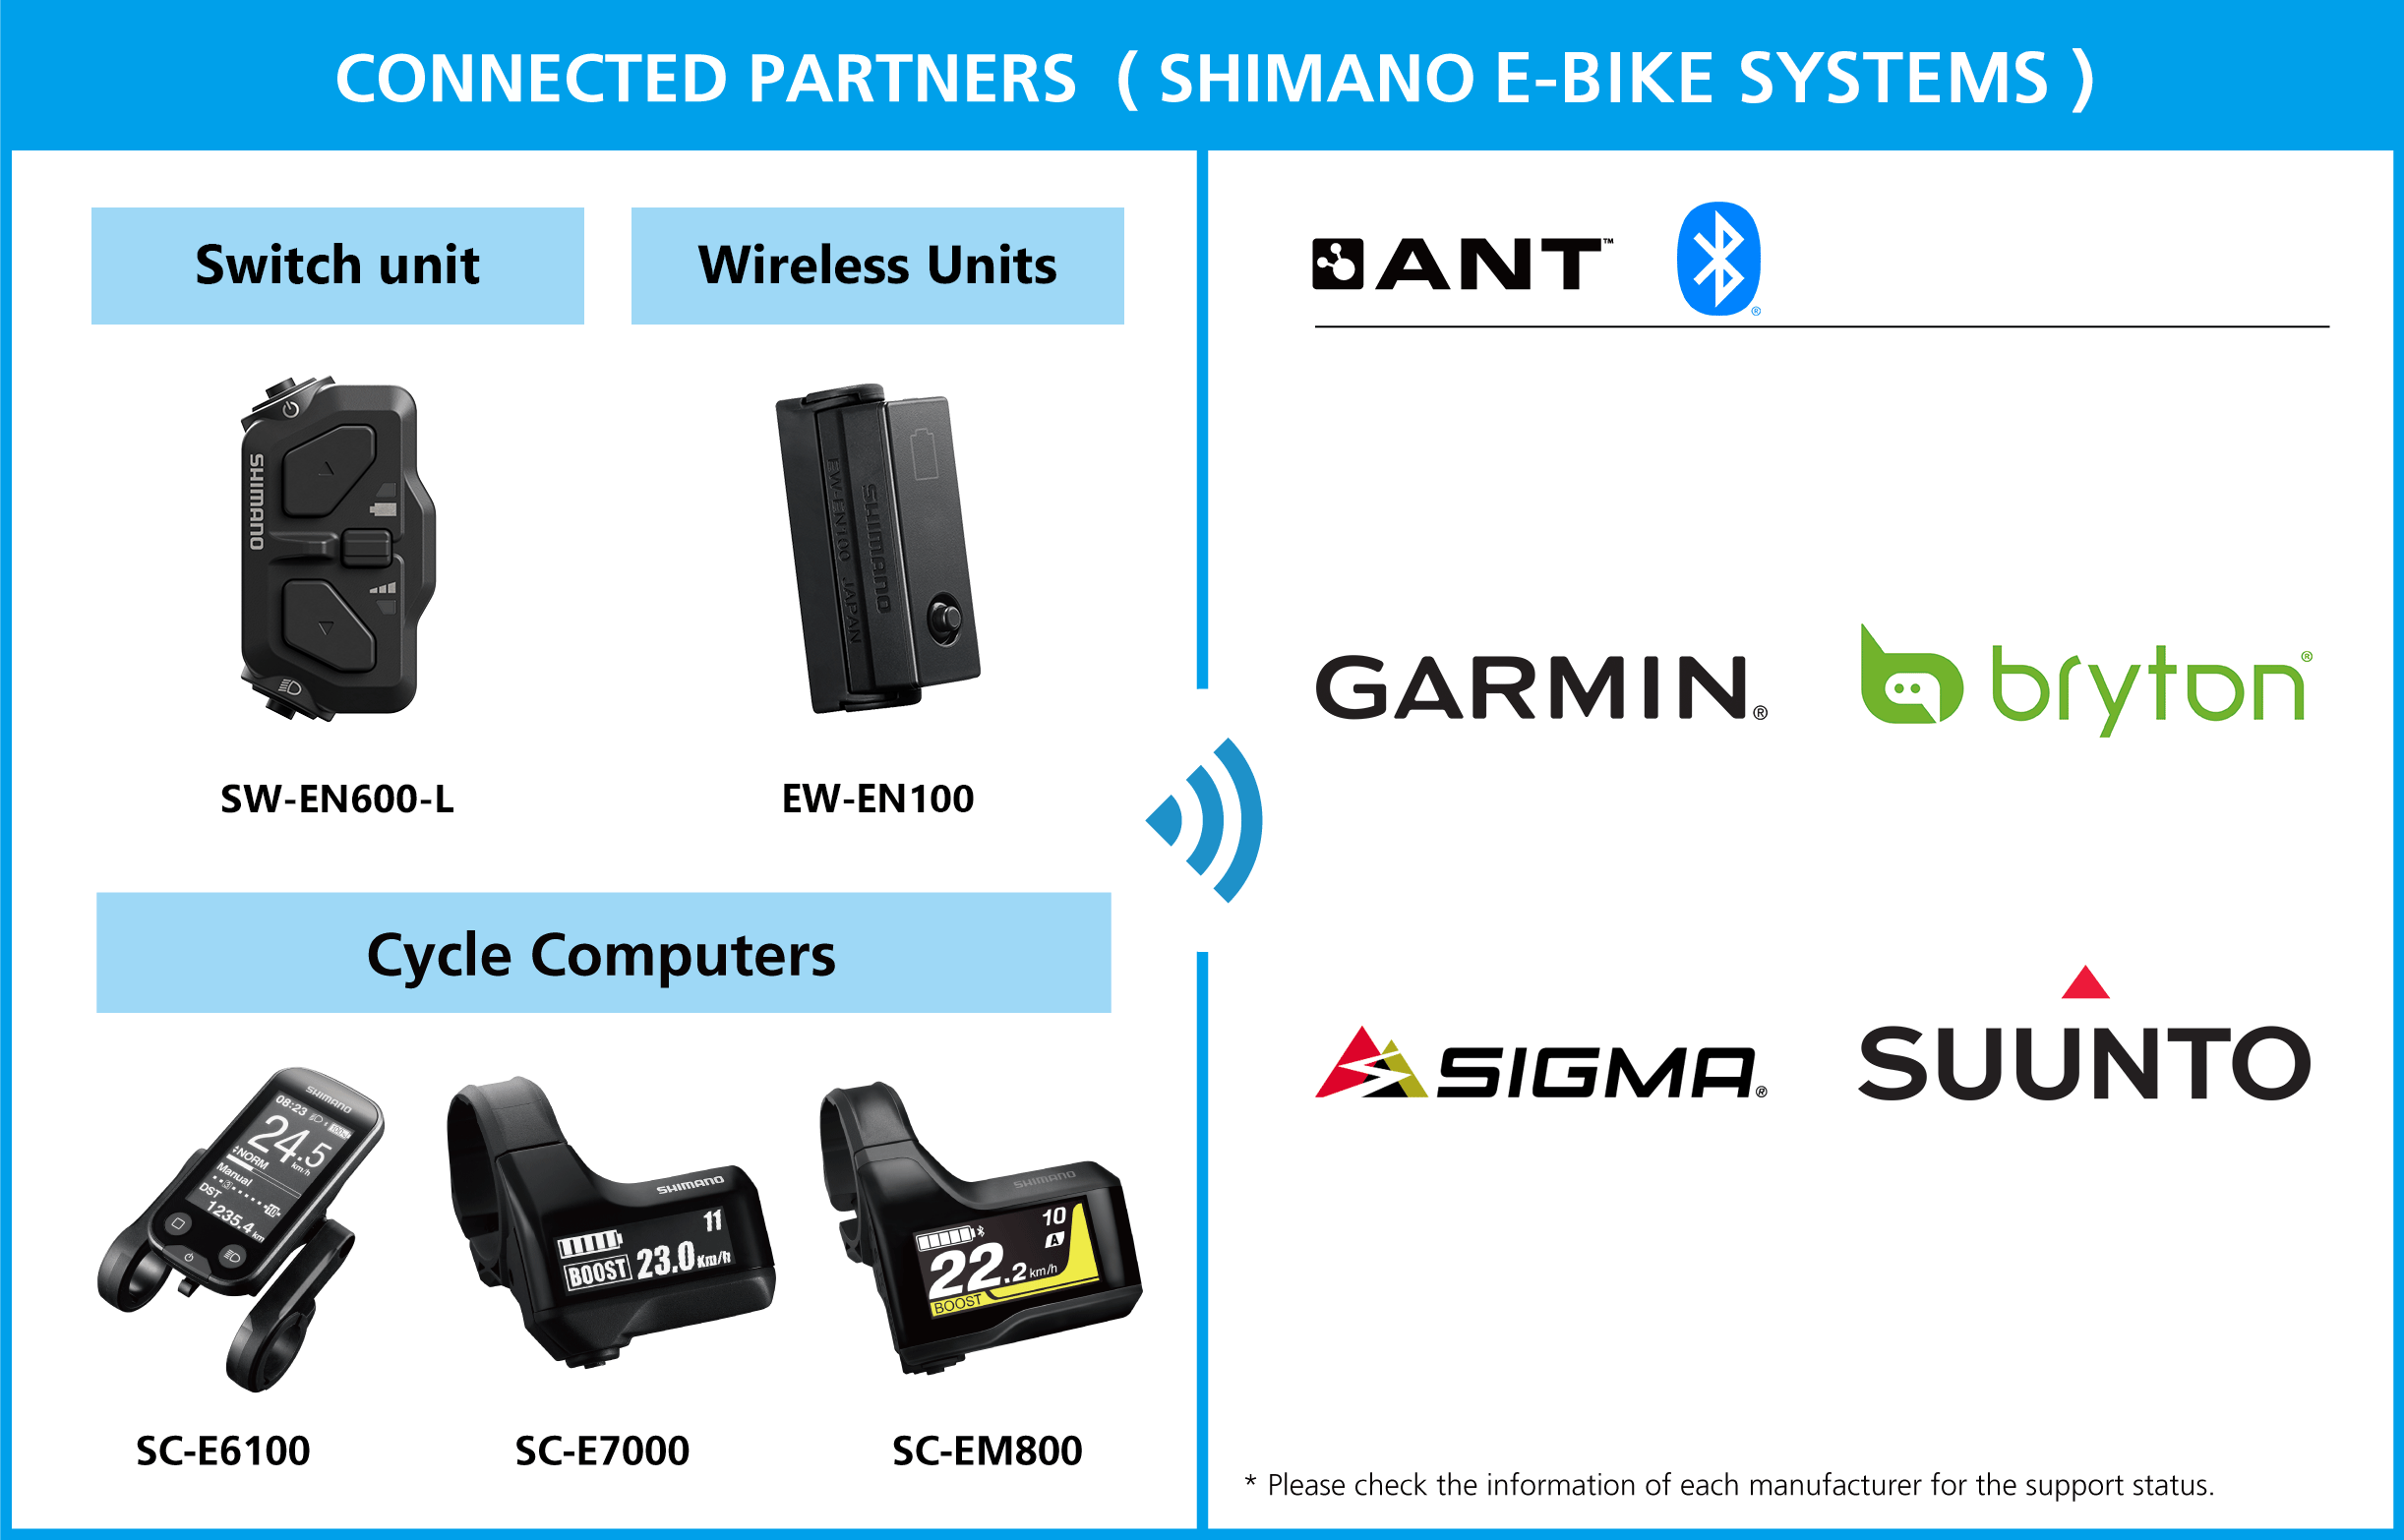 CONNECTED PARTNERS SHIMANO STEPS